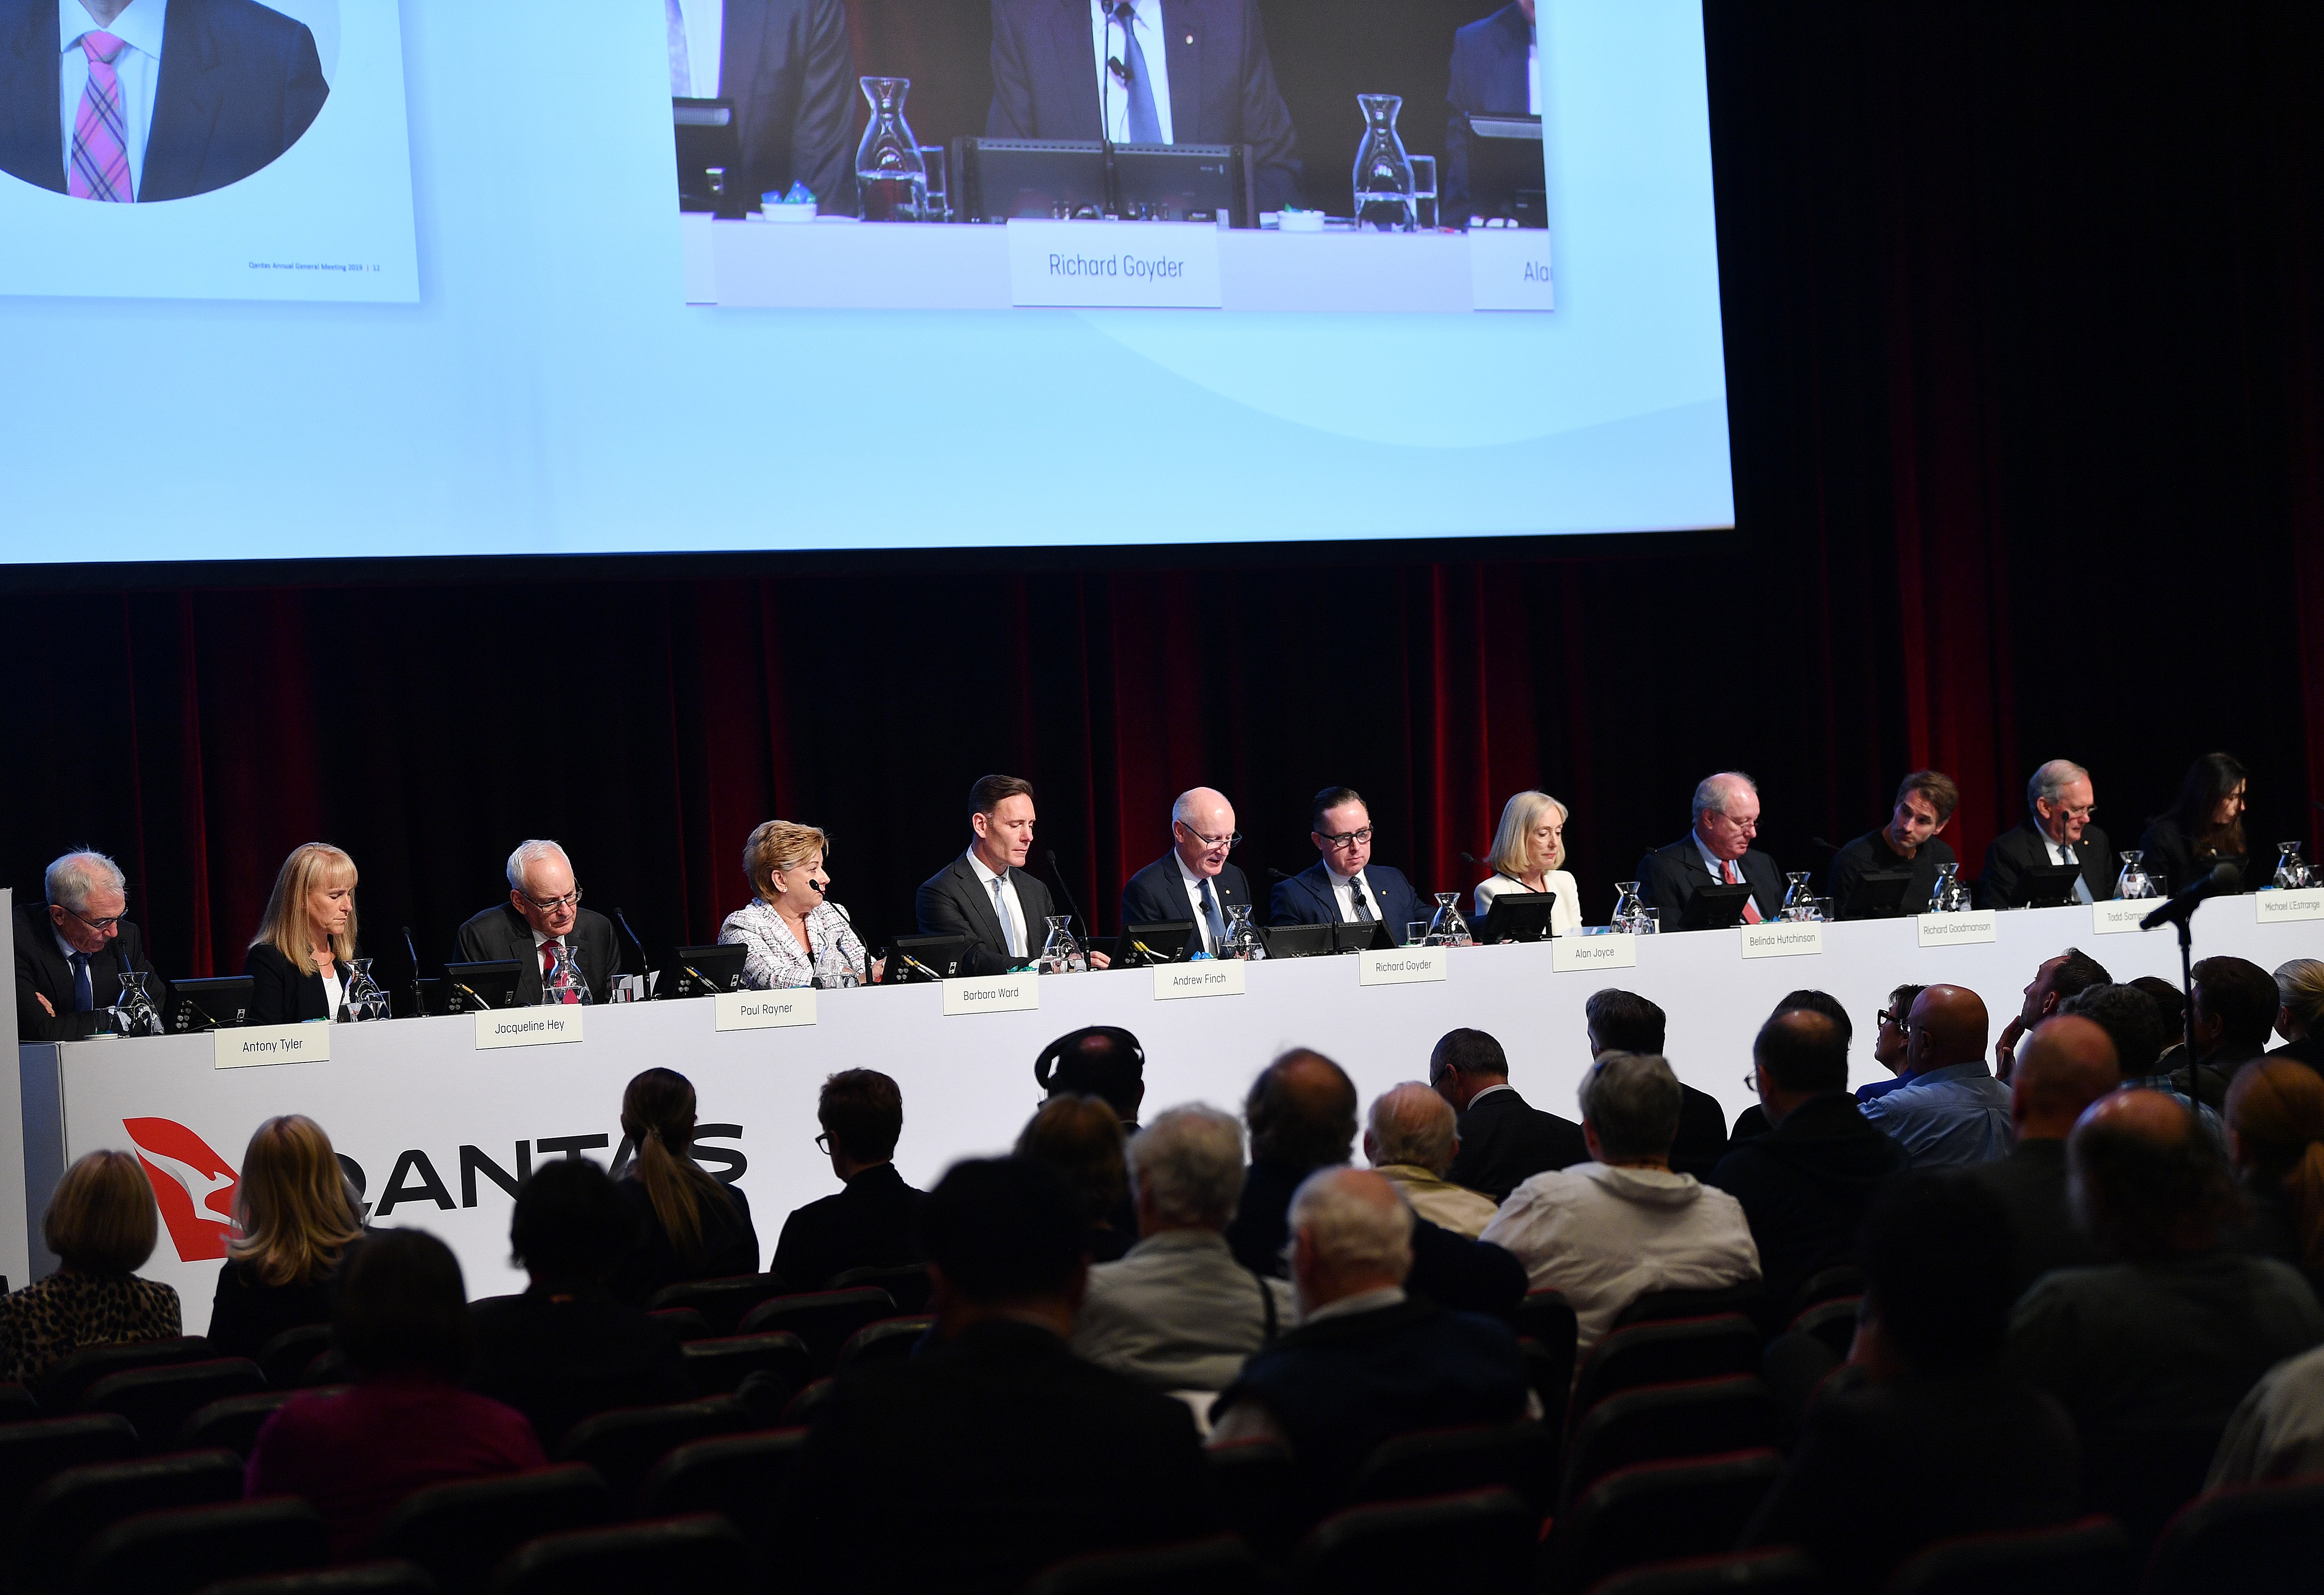 The 2019 Qantas annual general meeting in Adelaide faced questions over the airline’s role in transporting deportees.